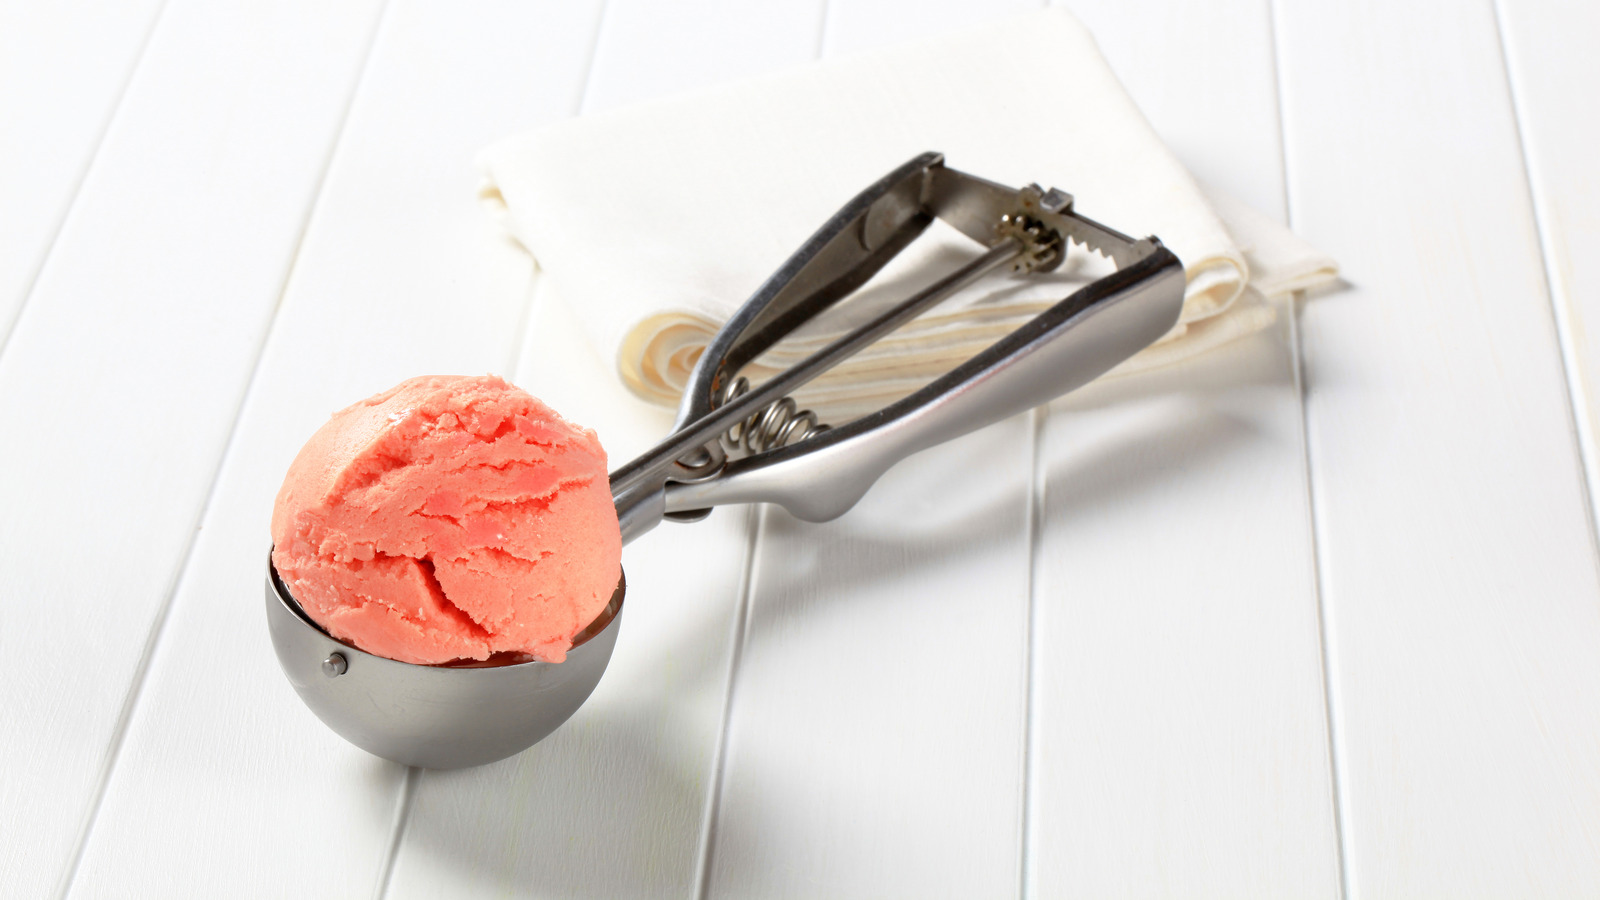 https://www.thedailymeal.com/img/gallery/the-one-ingredient-hack-for-delicious-sorbet-overnight/l-intro-1697328673.jpg